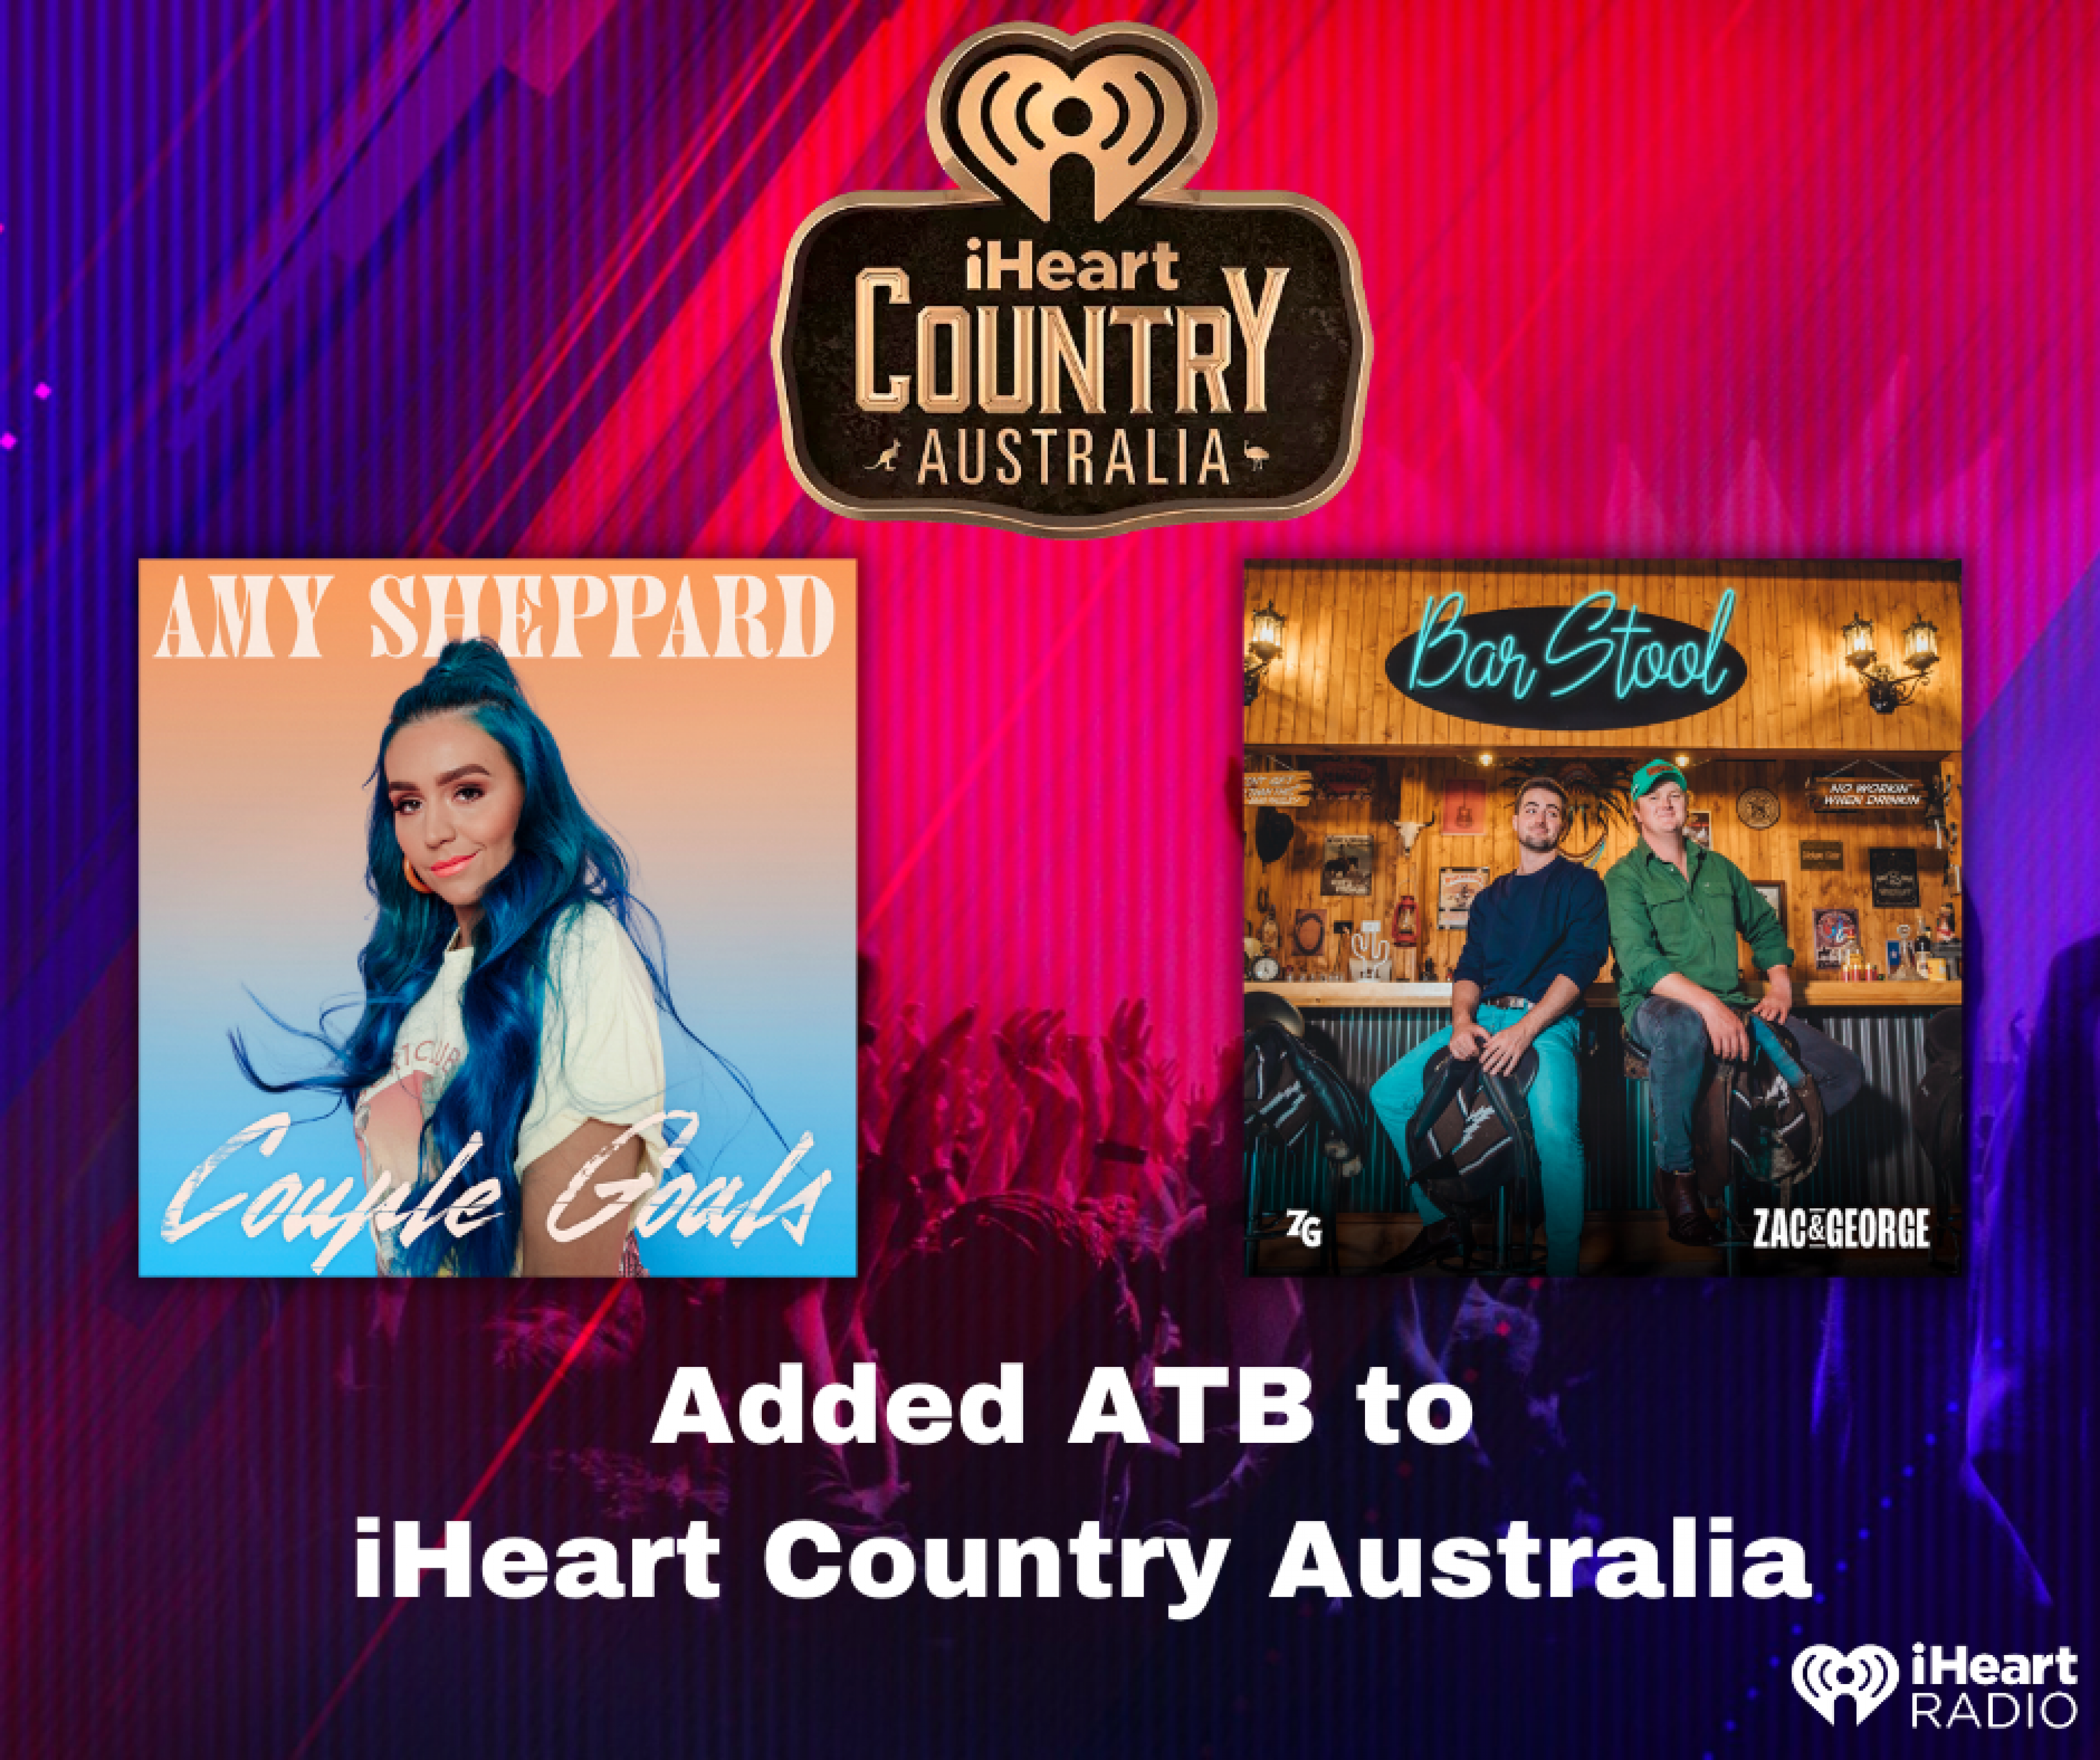 Amy Sheppard and Zac & George added ATB to iHeart Country 